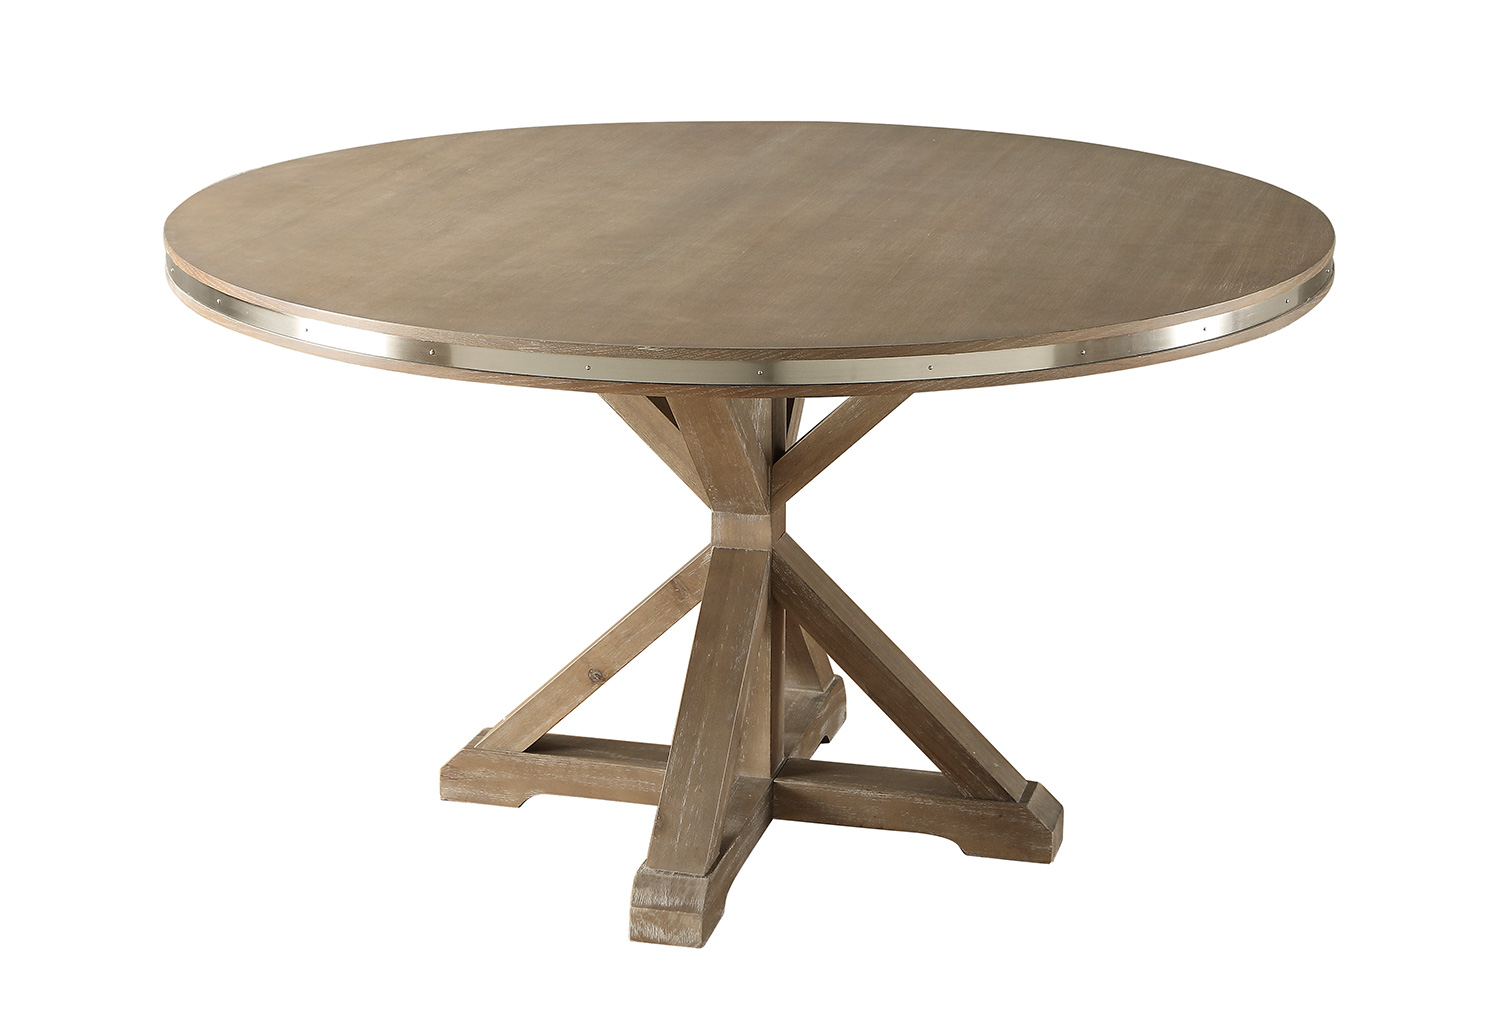 Homelegance Beaugrand Round Dining Table - Brown